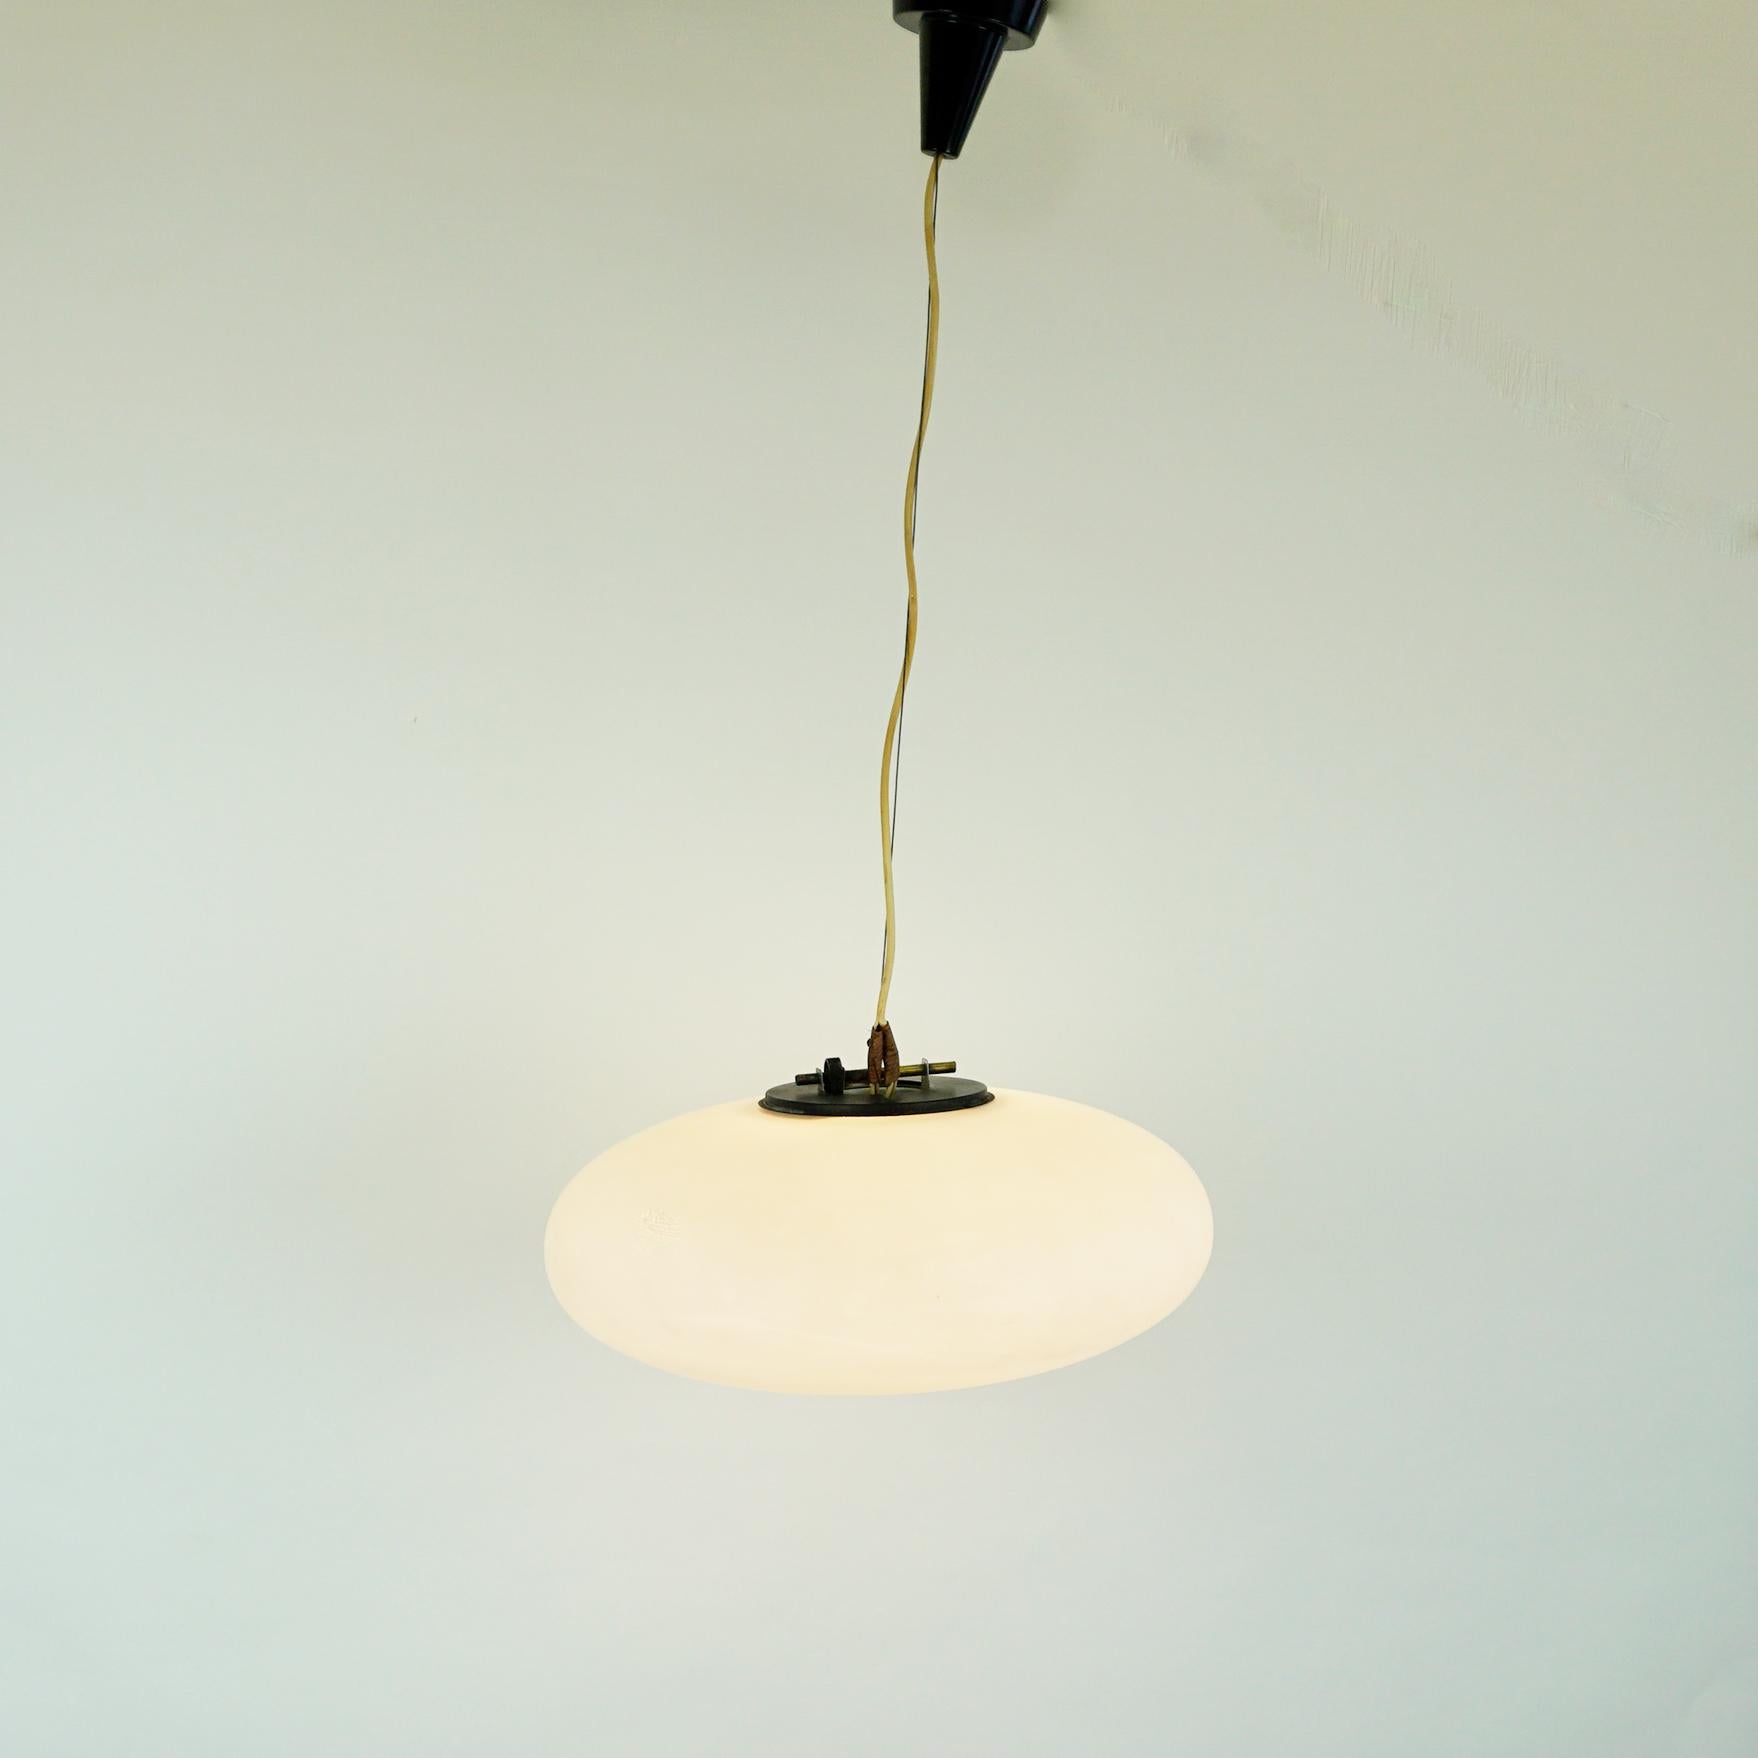 This charming midcentury pendant light was designed and manufactured in Italy and it´s shape is very close to lamps by Stilnovo. It features a beautiful oval opaline glass shade, black metal and brass details and a steel wire. The crème white